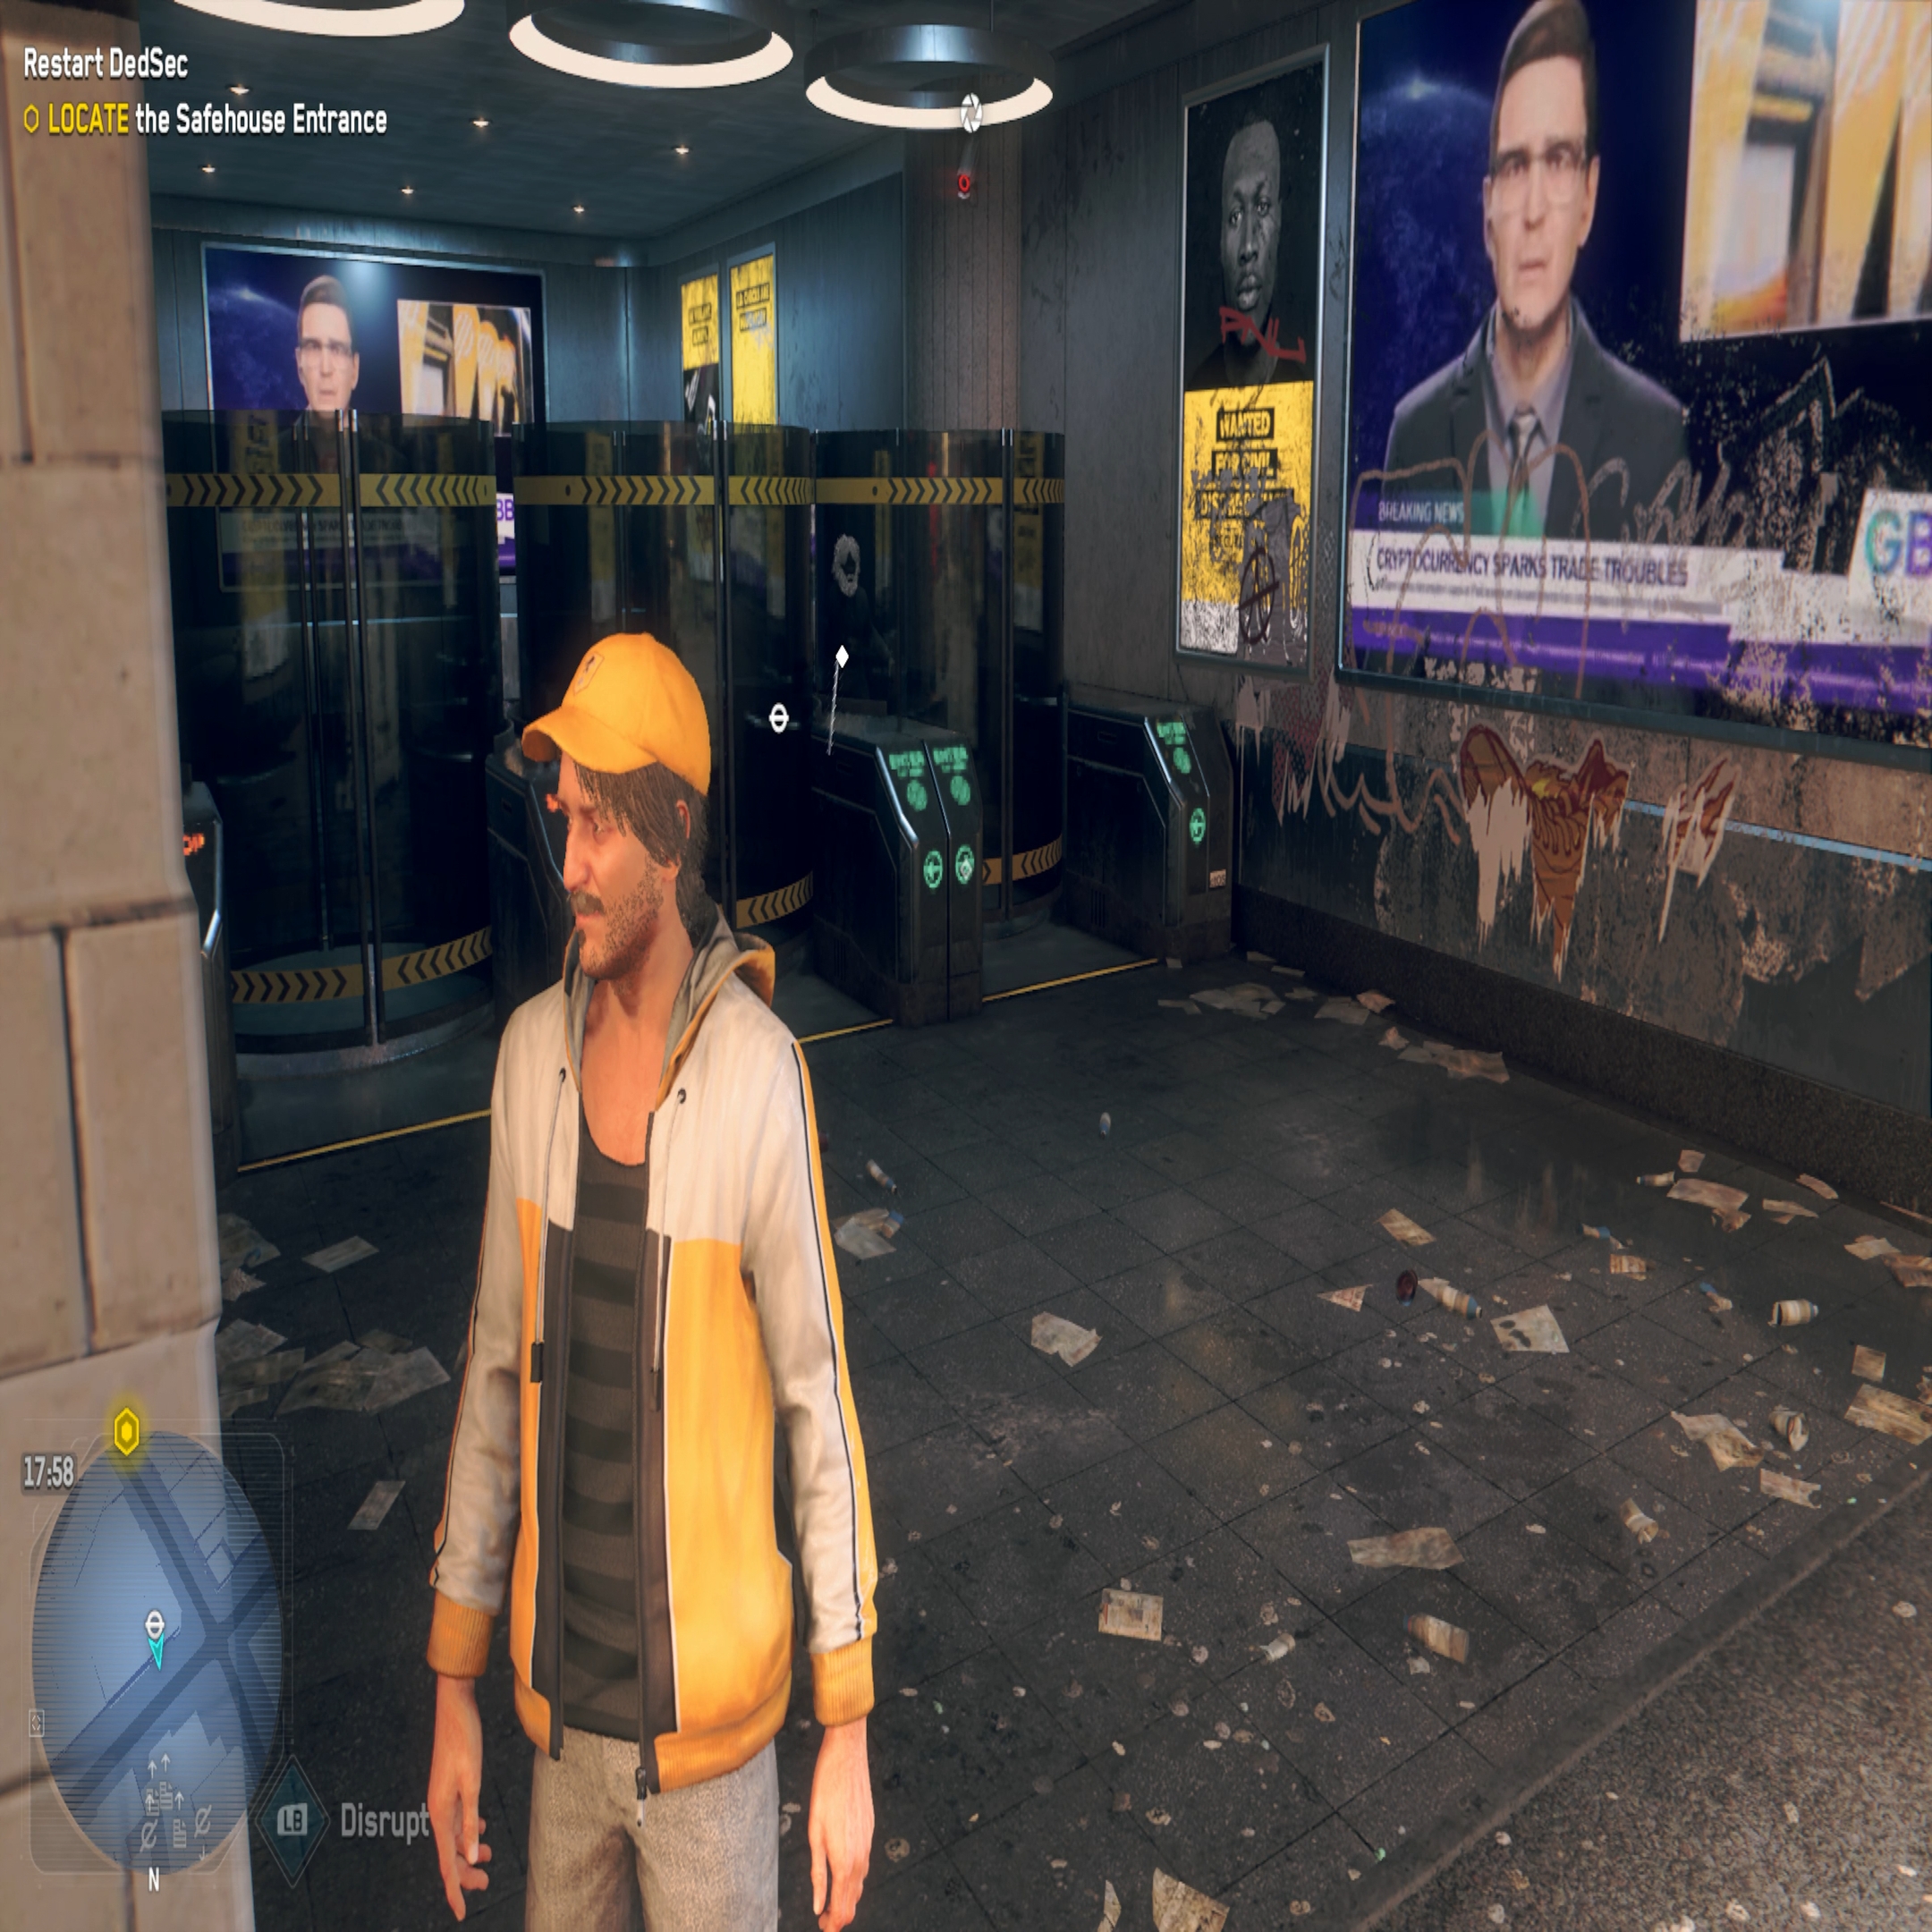 Xbox Series S Runs Watch Dogs Legion at Dynamic 1080p; RT Is Slightly  Better on PC Than on Consoles